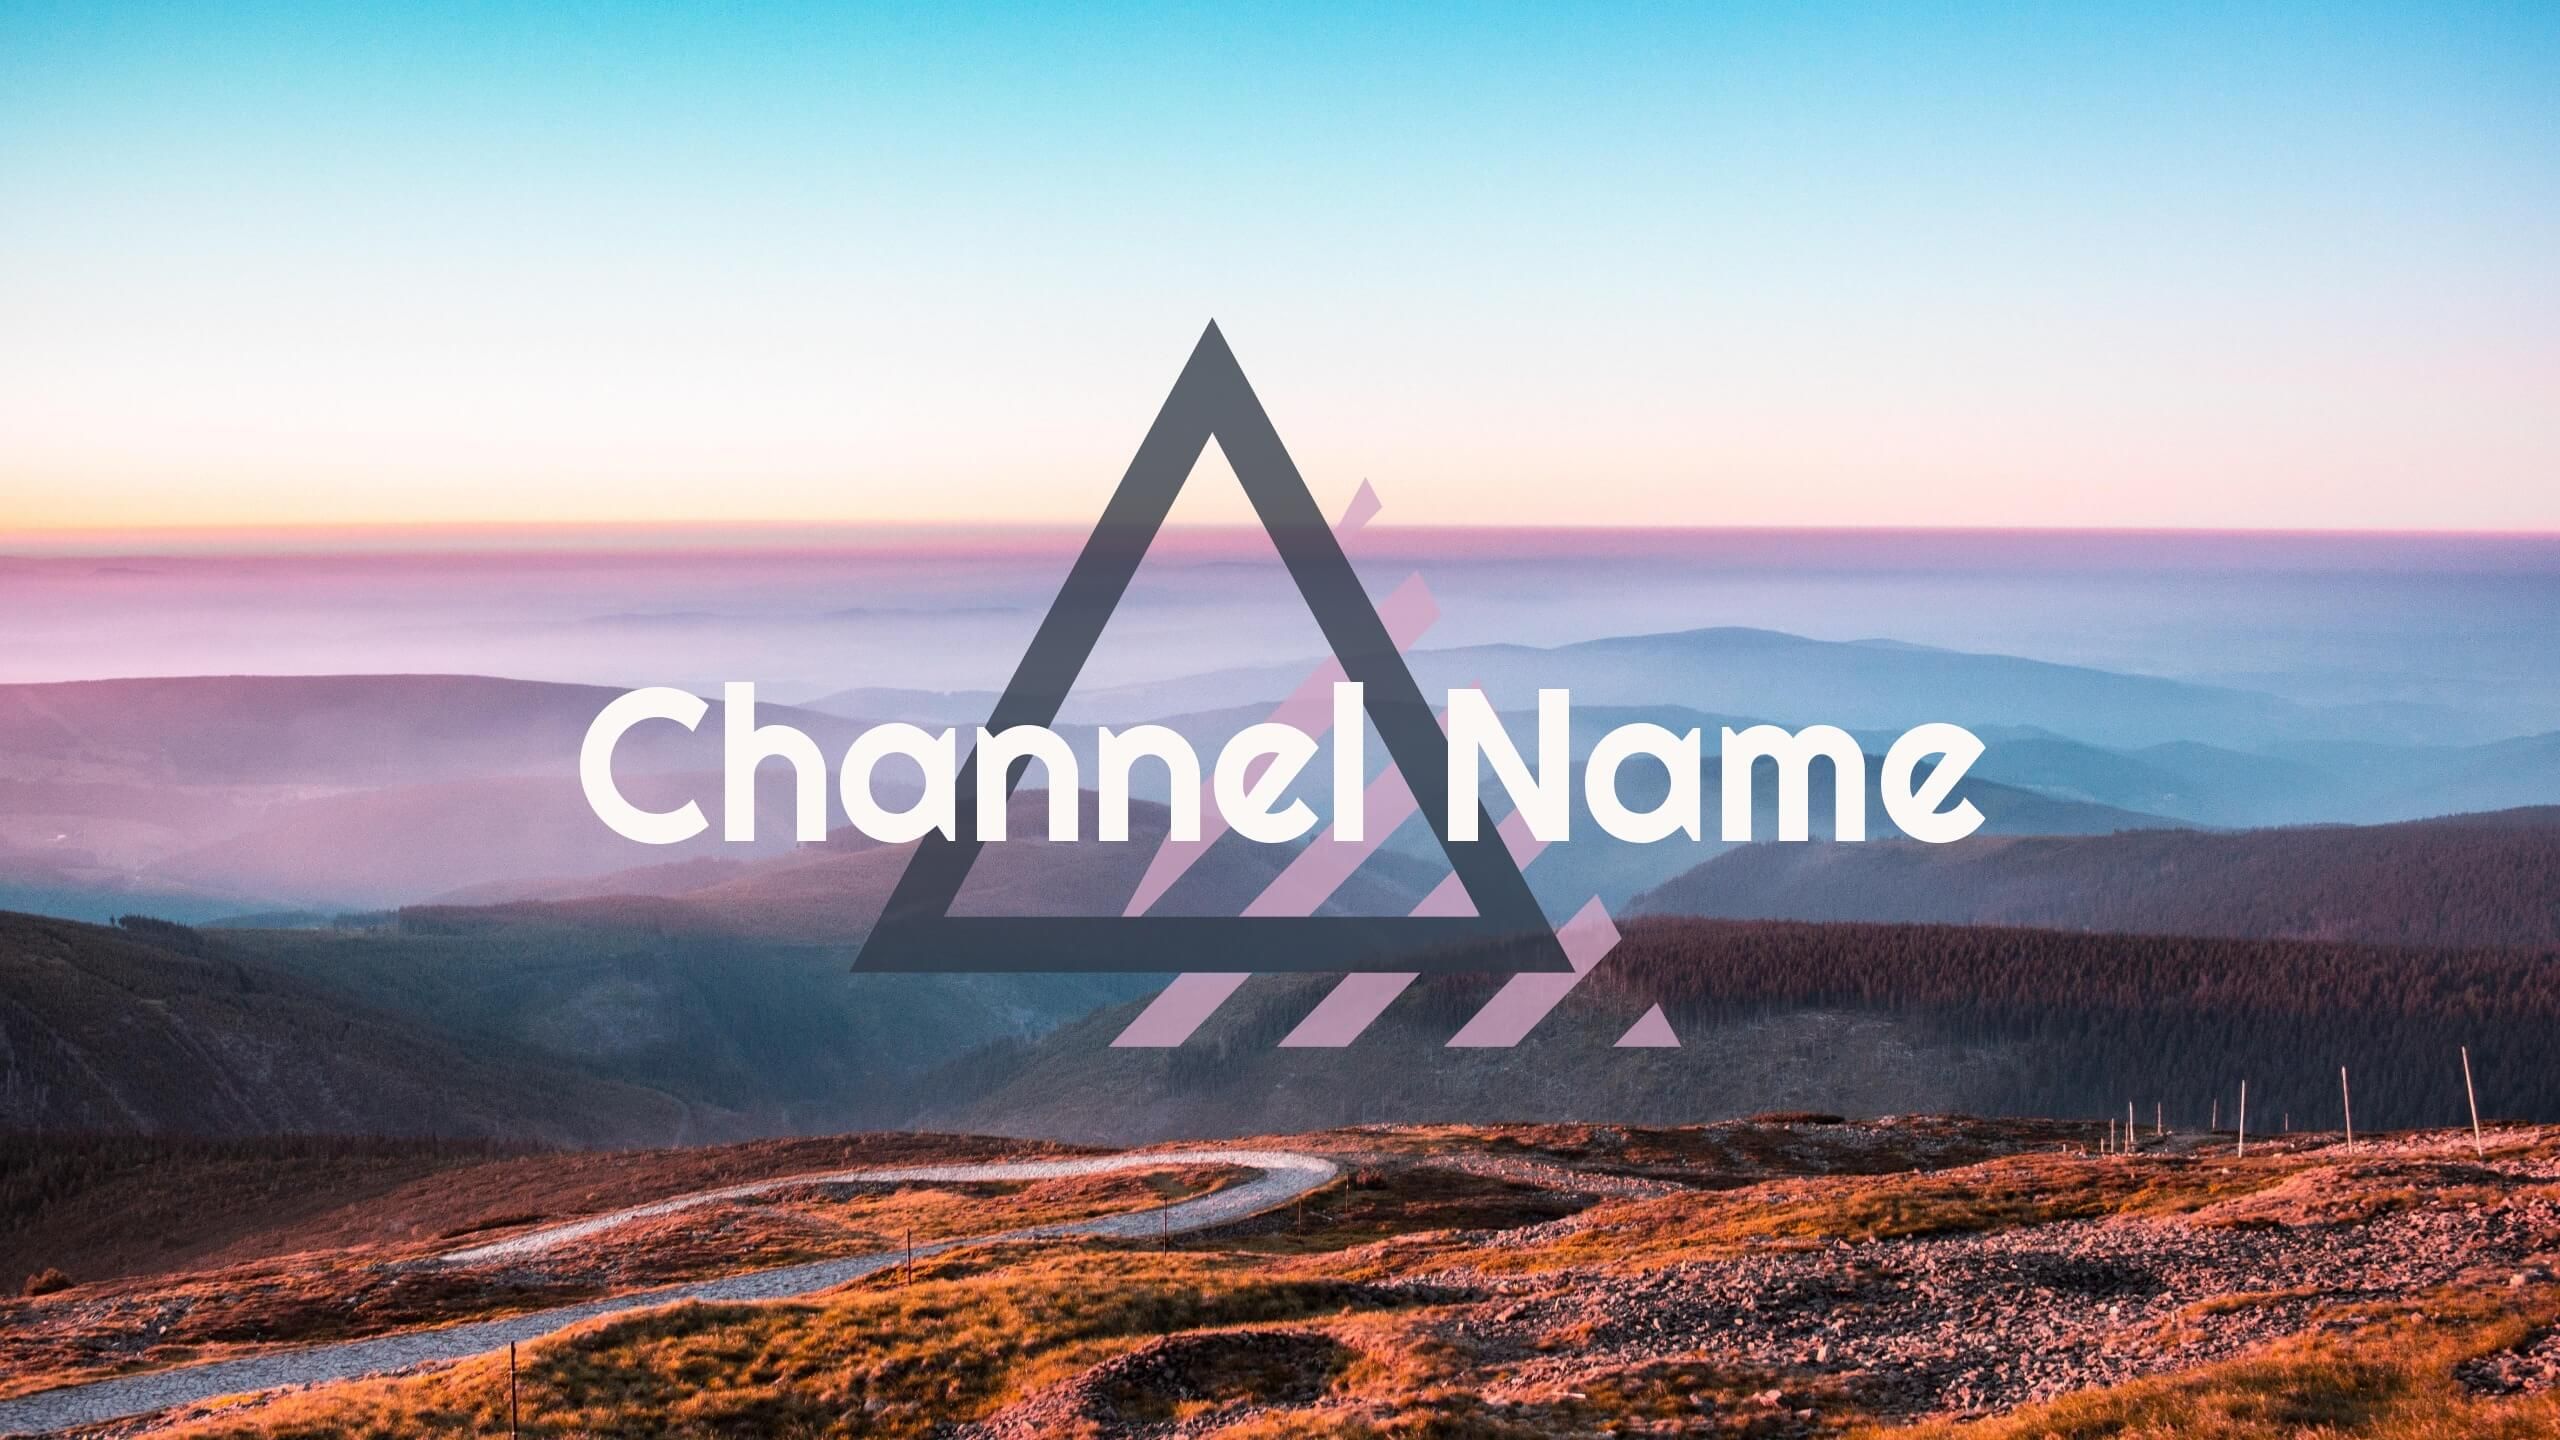 Banner template for a travel channel with a beautiful landscape in the background - YouTube channel names: Fresh inspirational ideas - Image